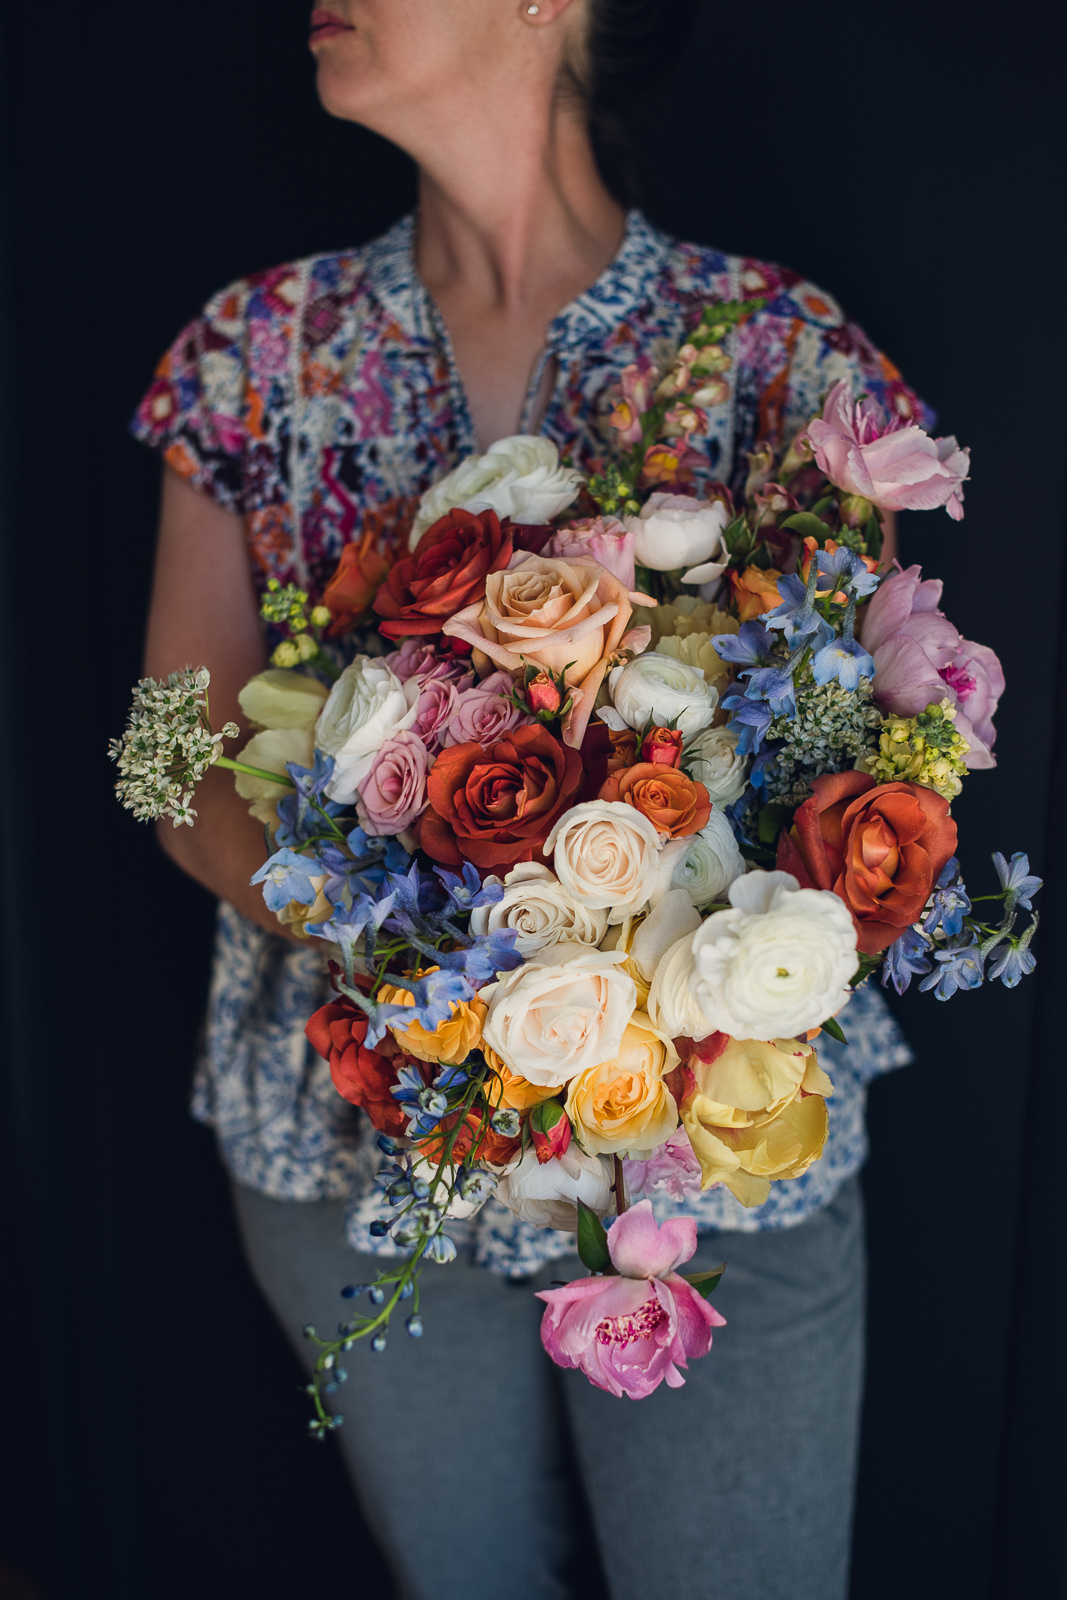 woman holding a bridal bouquet of refined colorful citrus wedding flowers